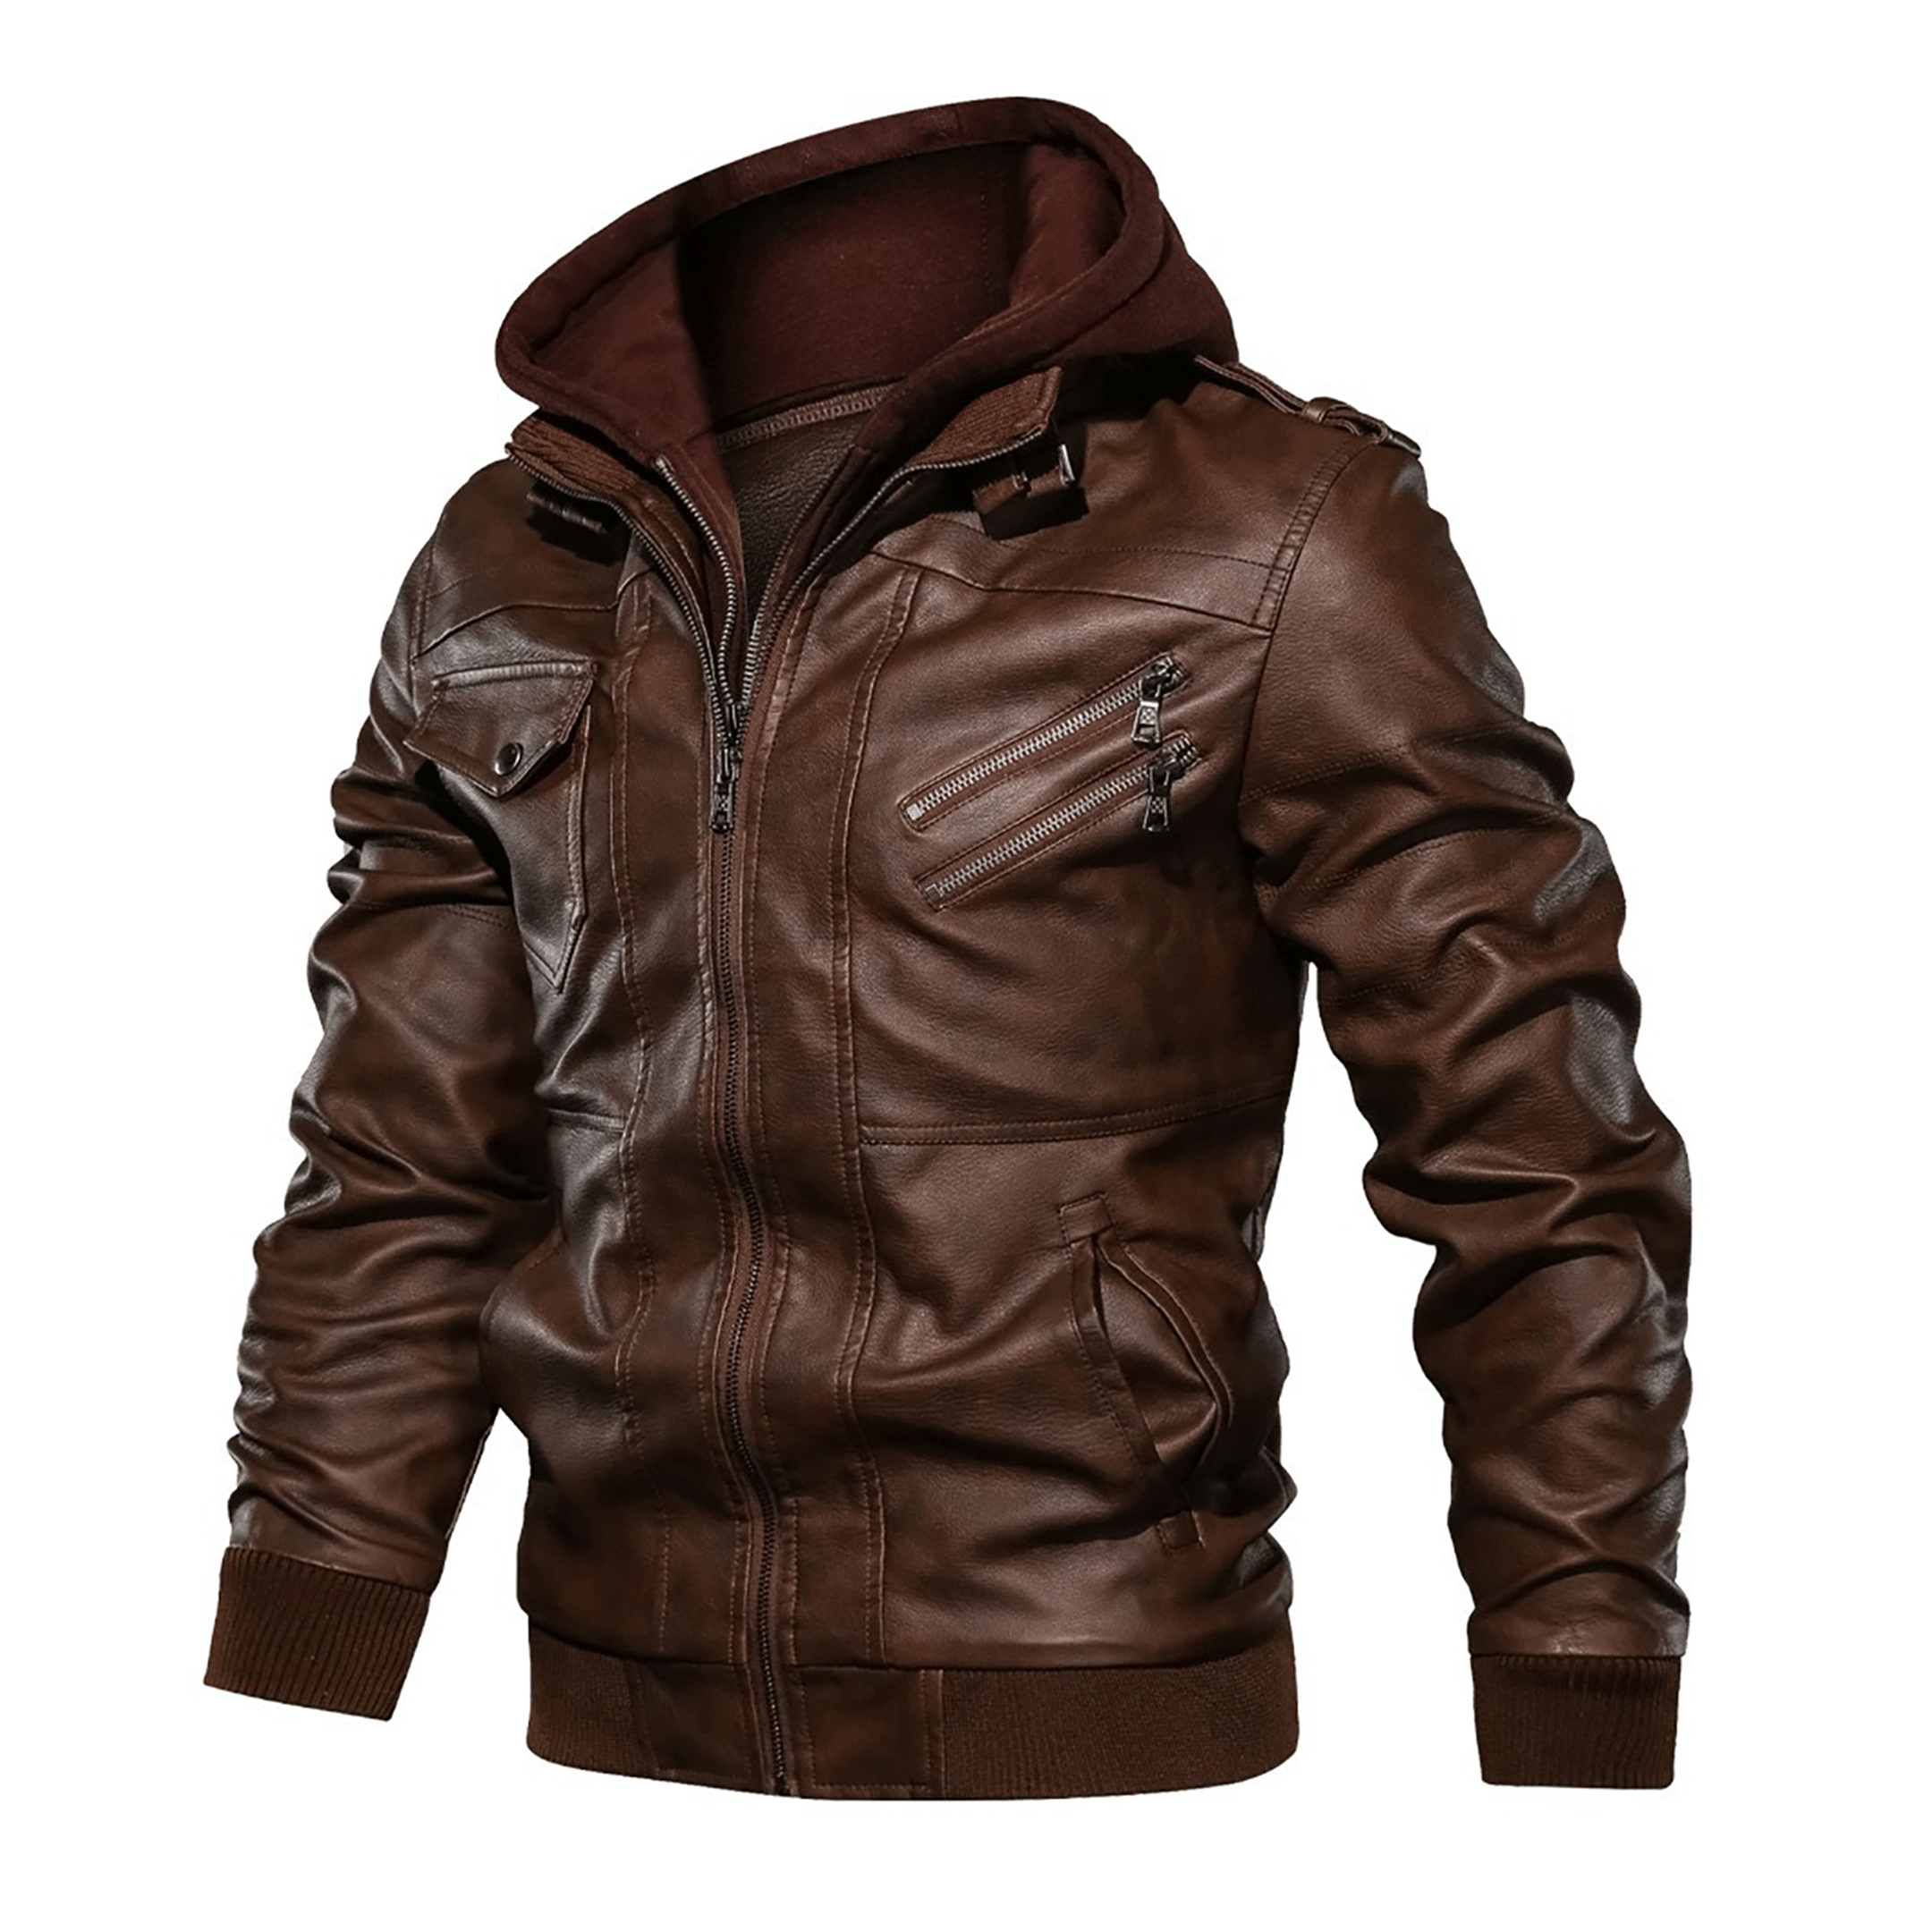 Top leather jackets and latest products 467